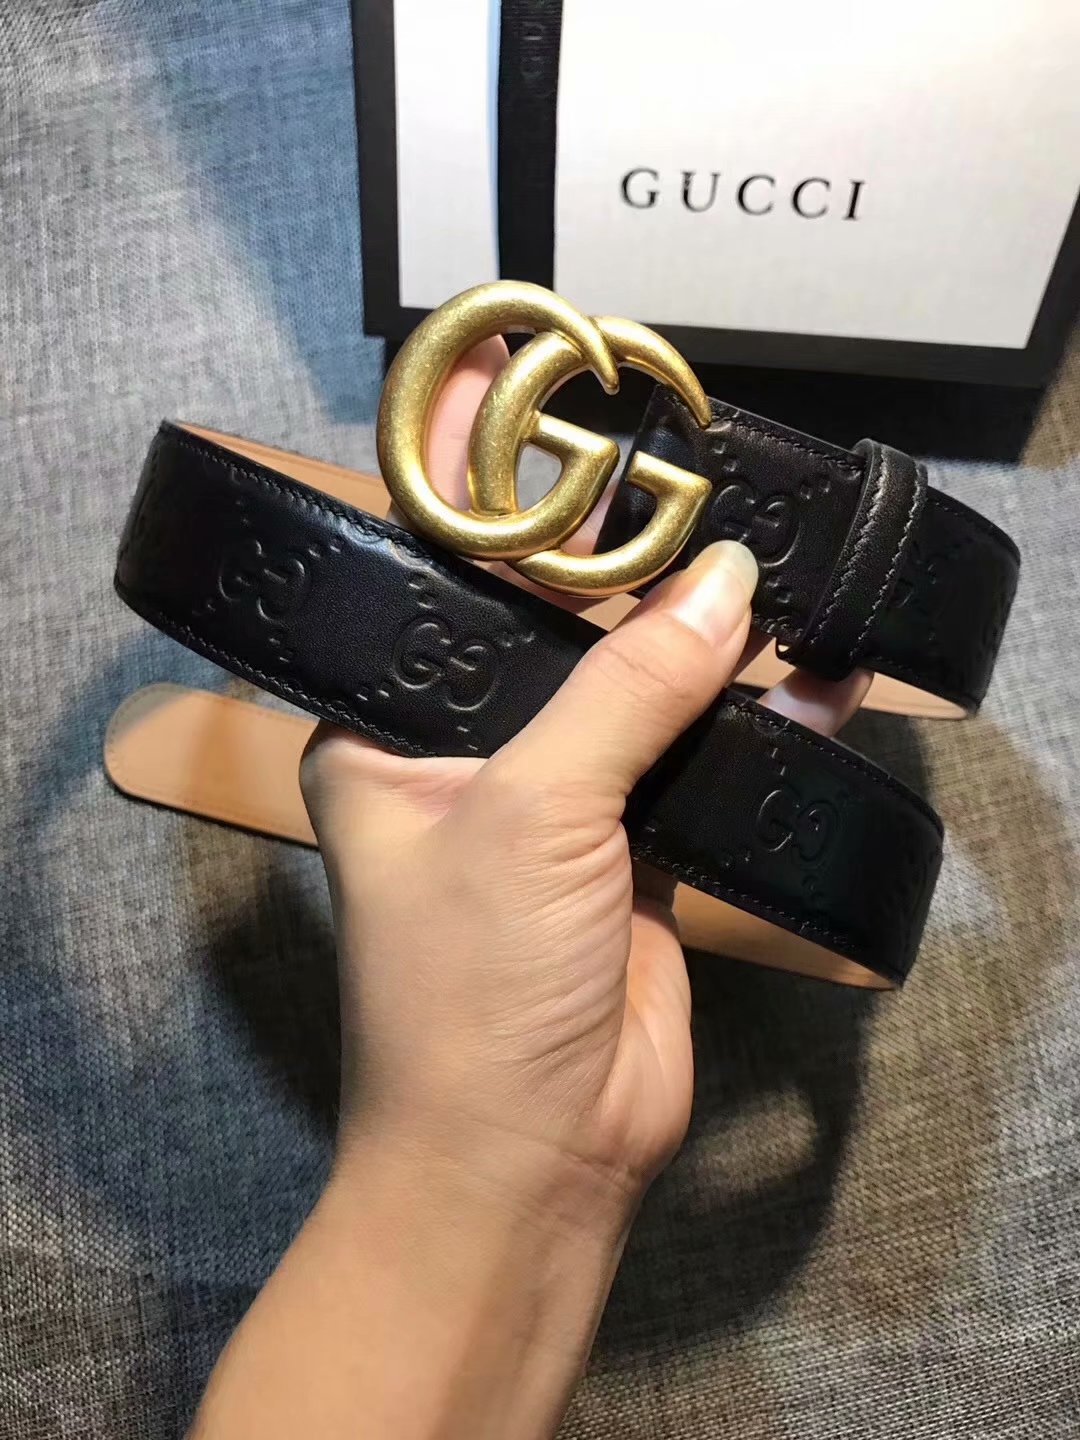 Cheap Replica Gucci Women Leather Belt Black Width 3.5cm With Gold Buckle 082